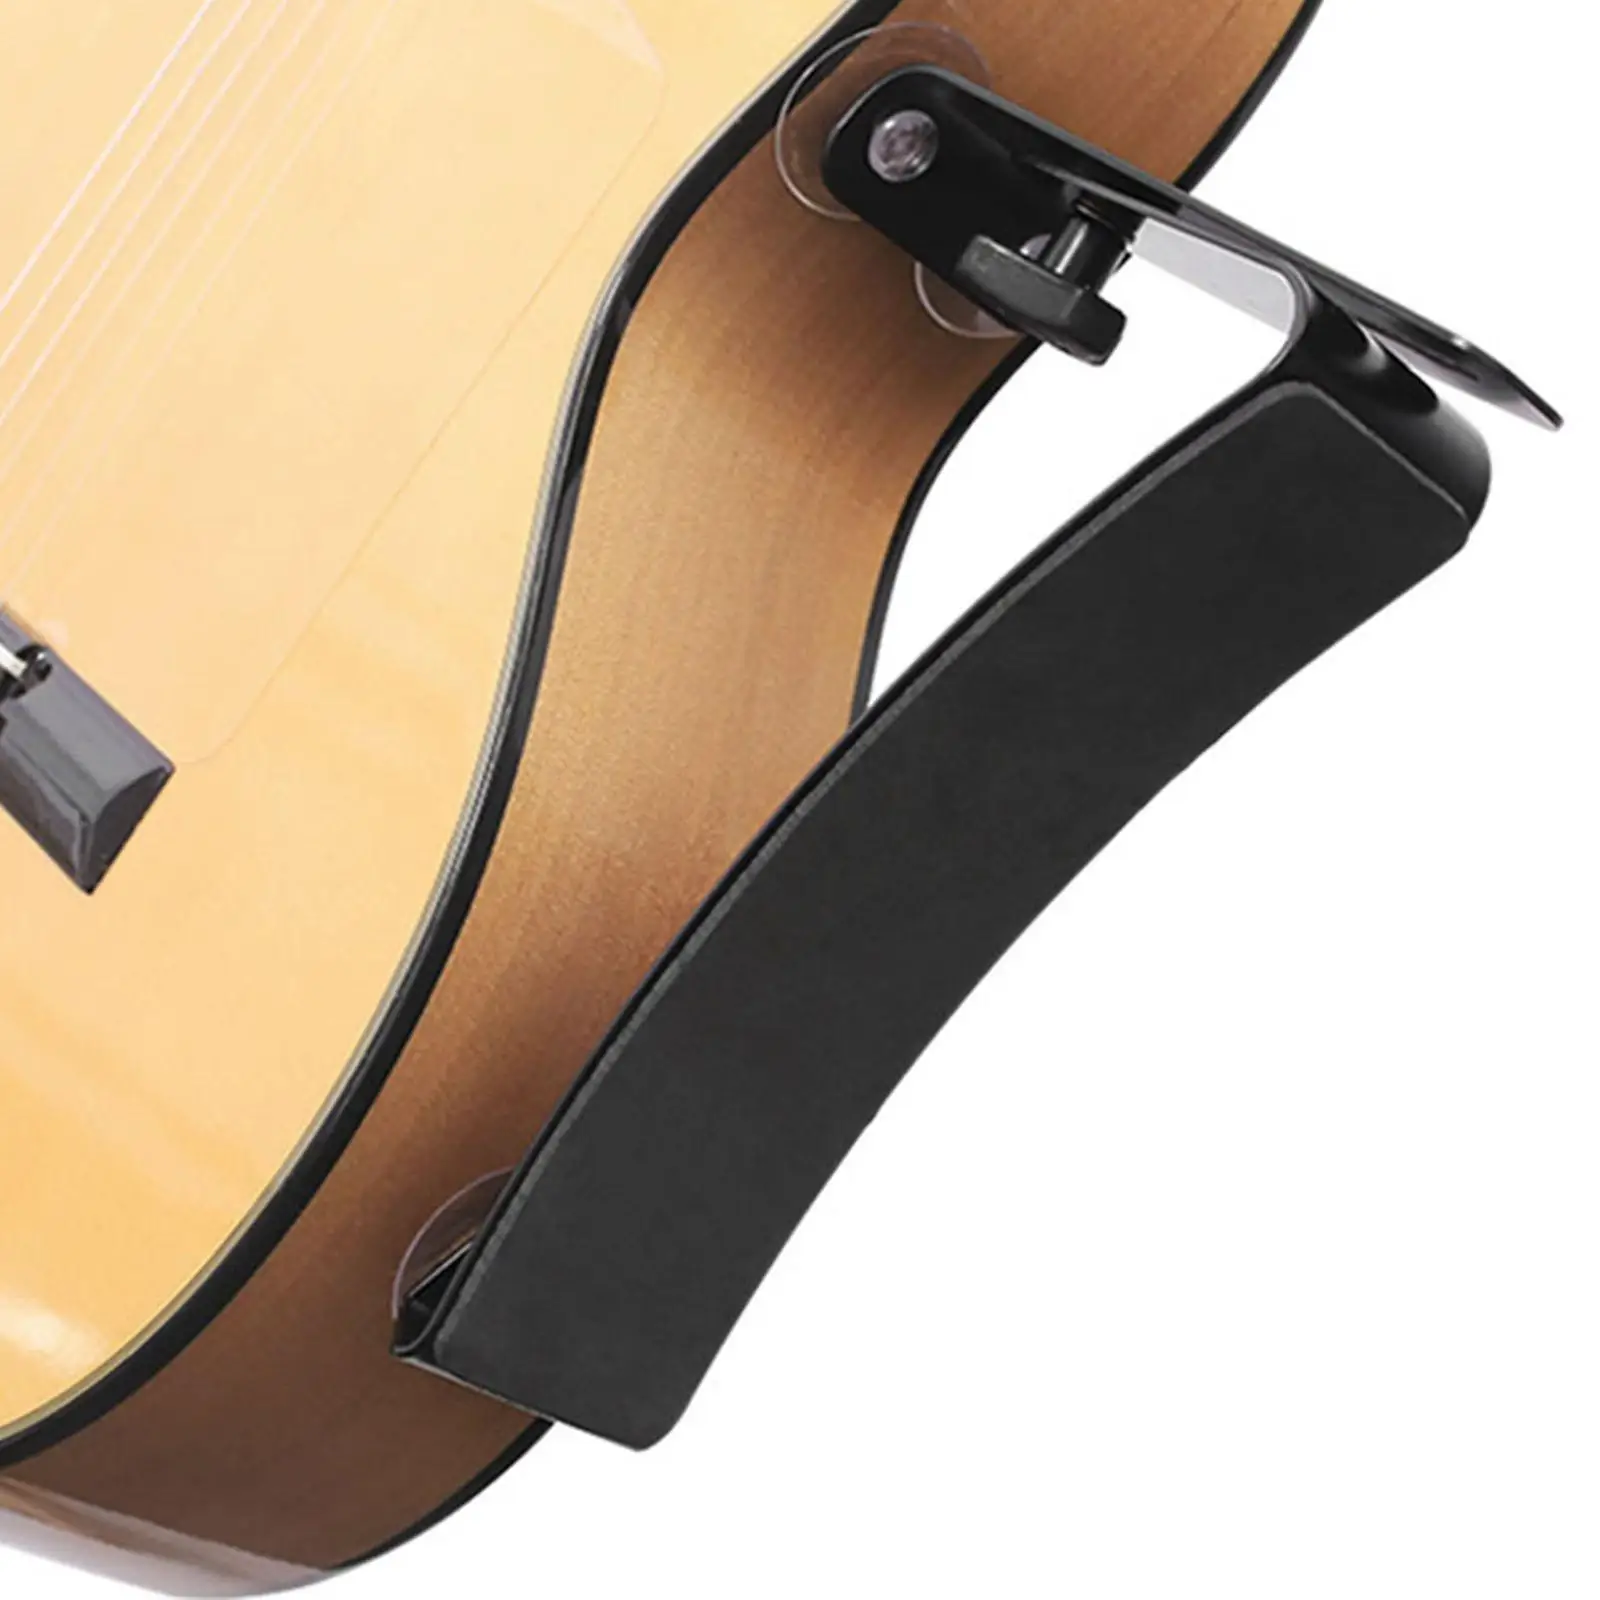 Professional Guitar Support,Guitar Cushion,Guitar Foot Stool,Guitar Neck Rest Support Cradle for Playing Guitar Prop